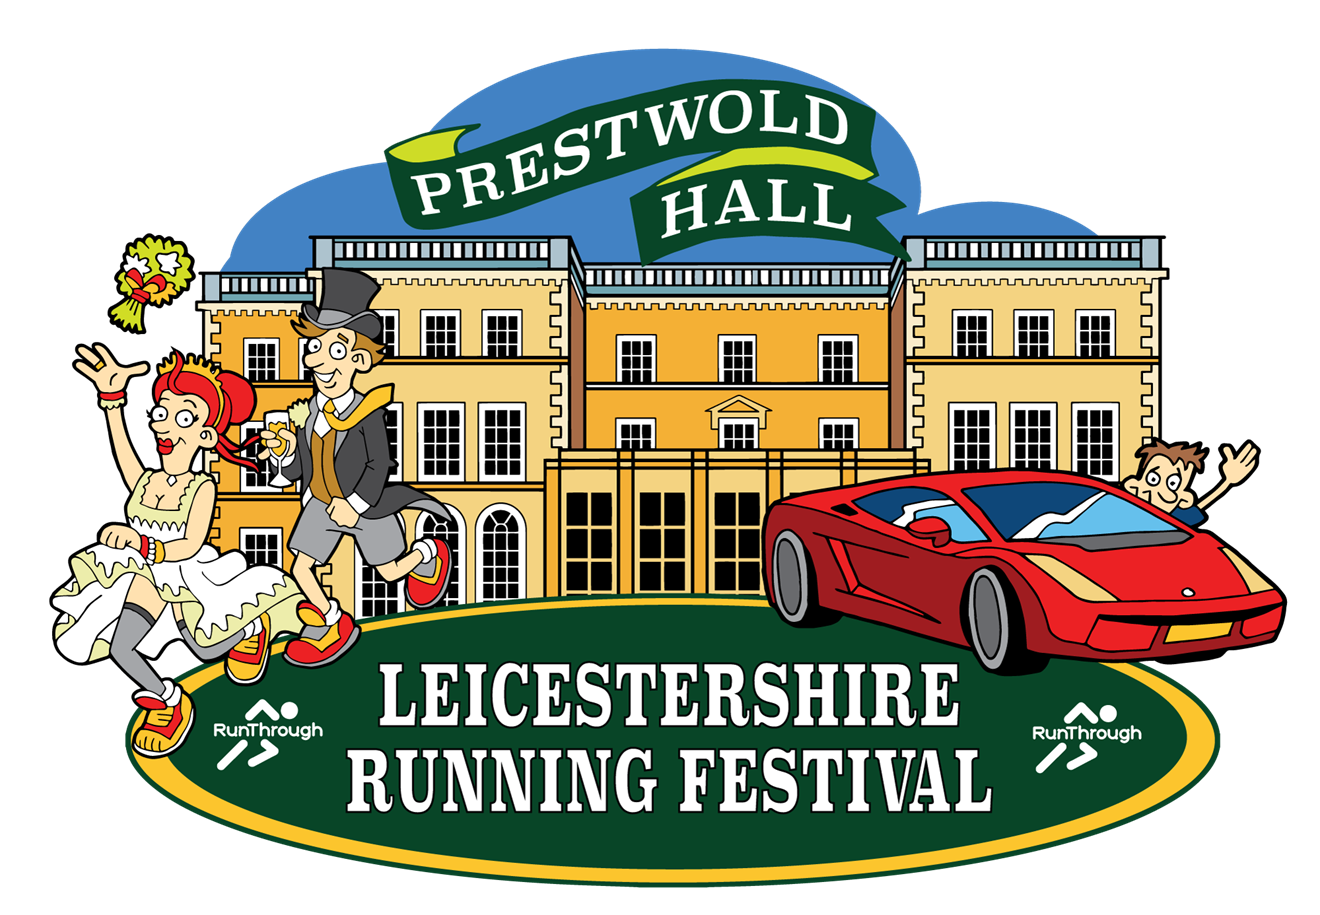 Leicestershire running festival logo